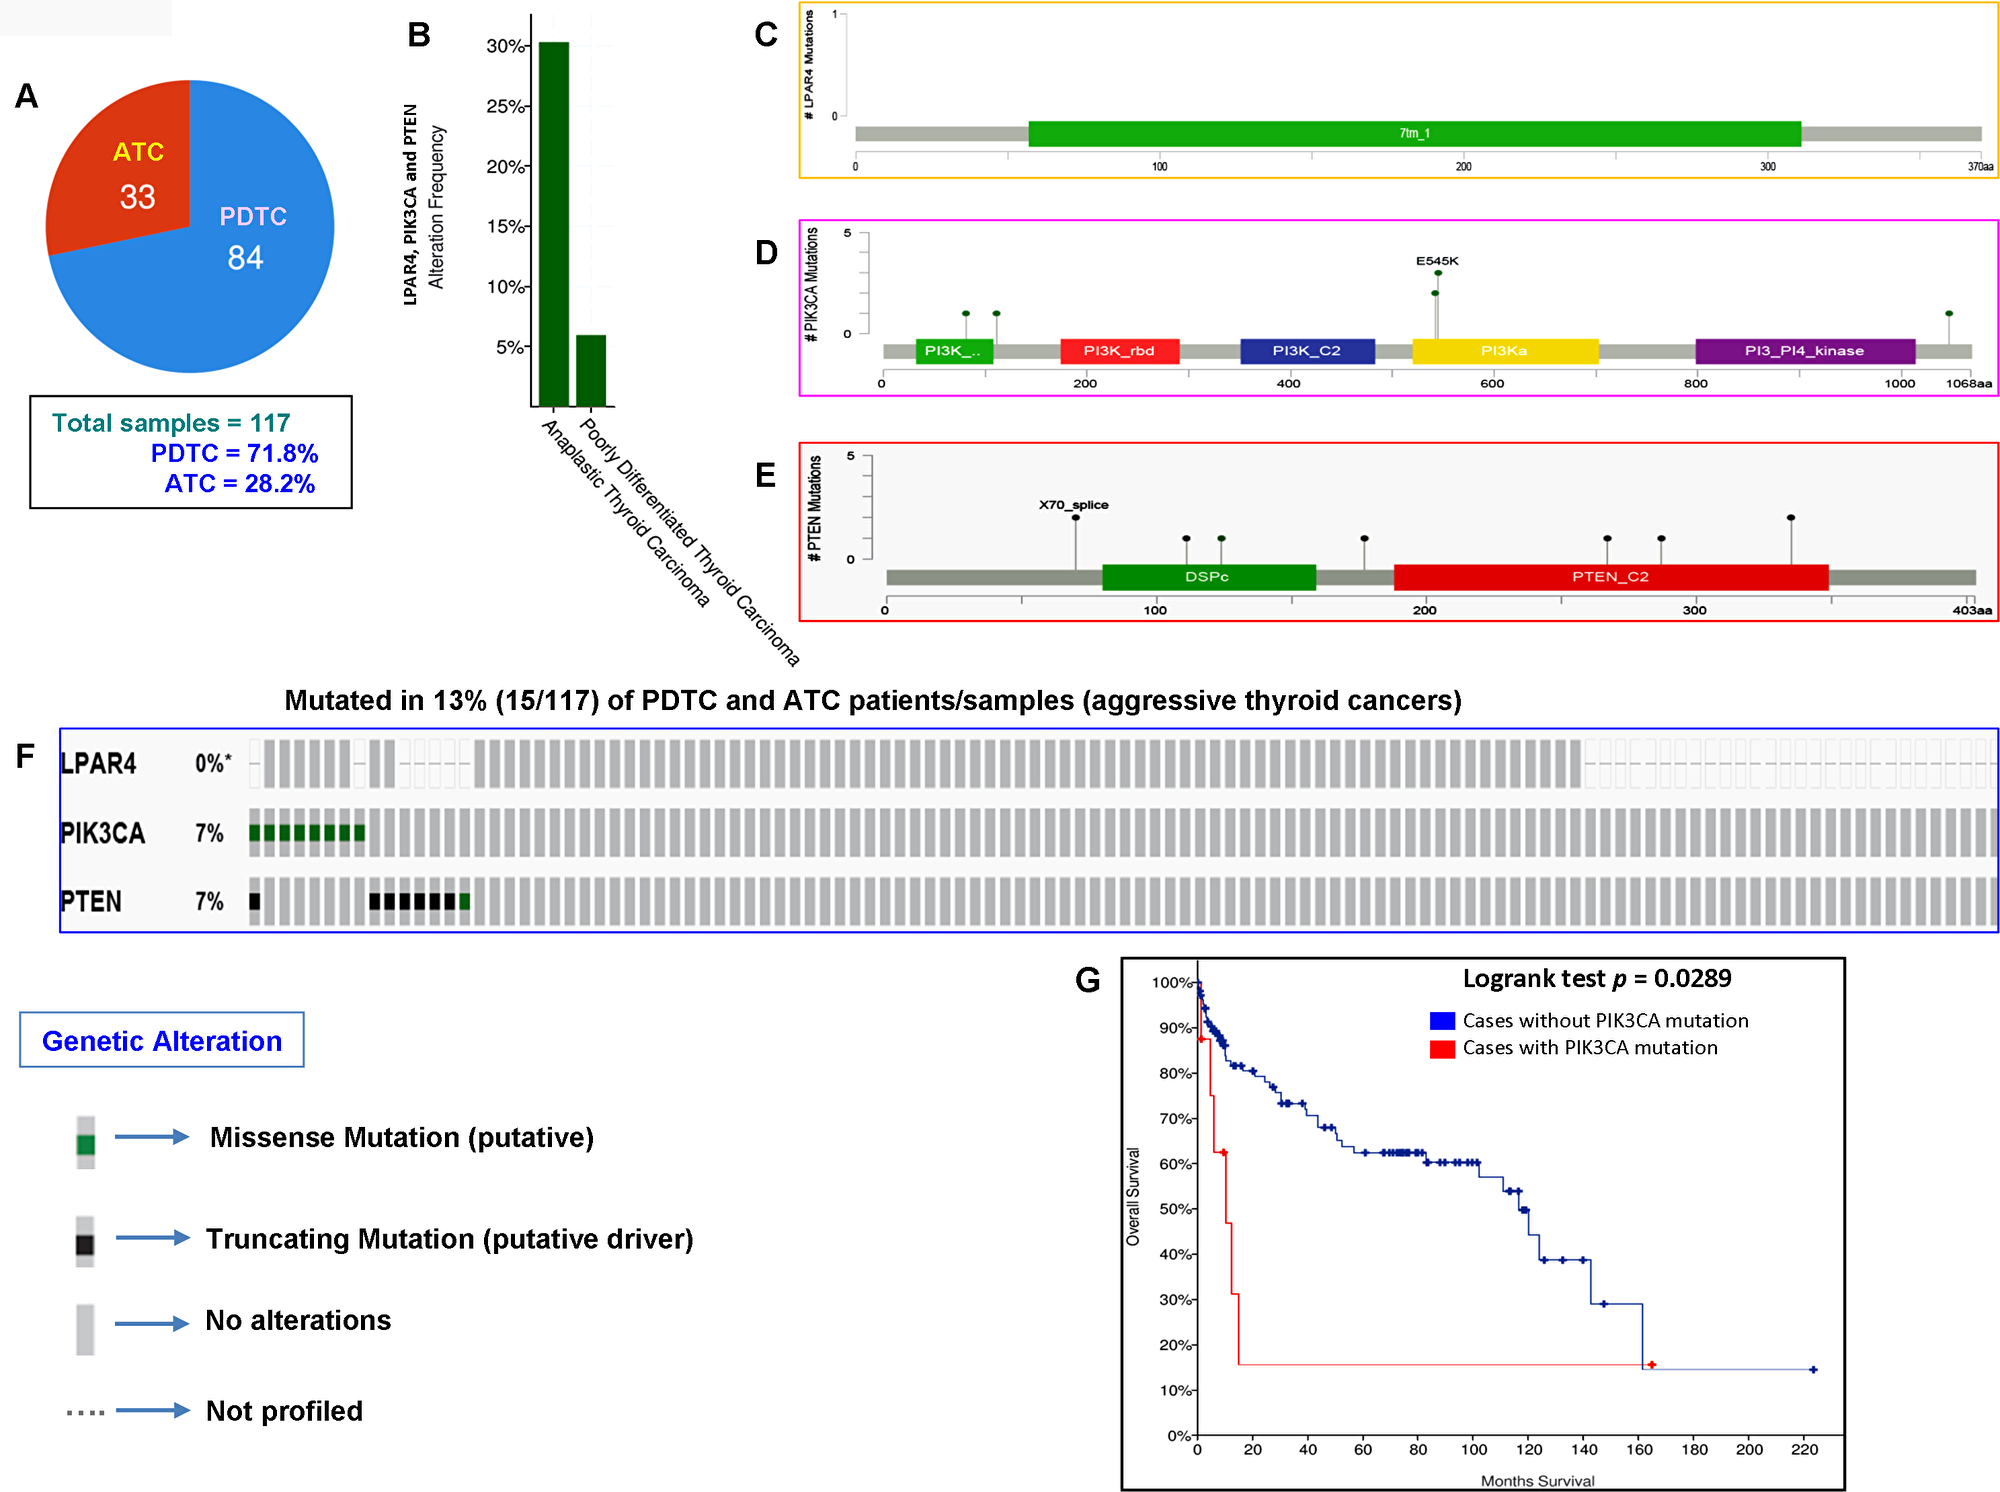 Prevalence of GPCR-mediated PI3K pathway mutations in PDTC and ATC (aggressive thyroid cancers).